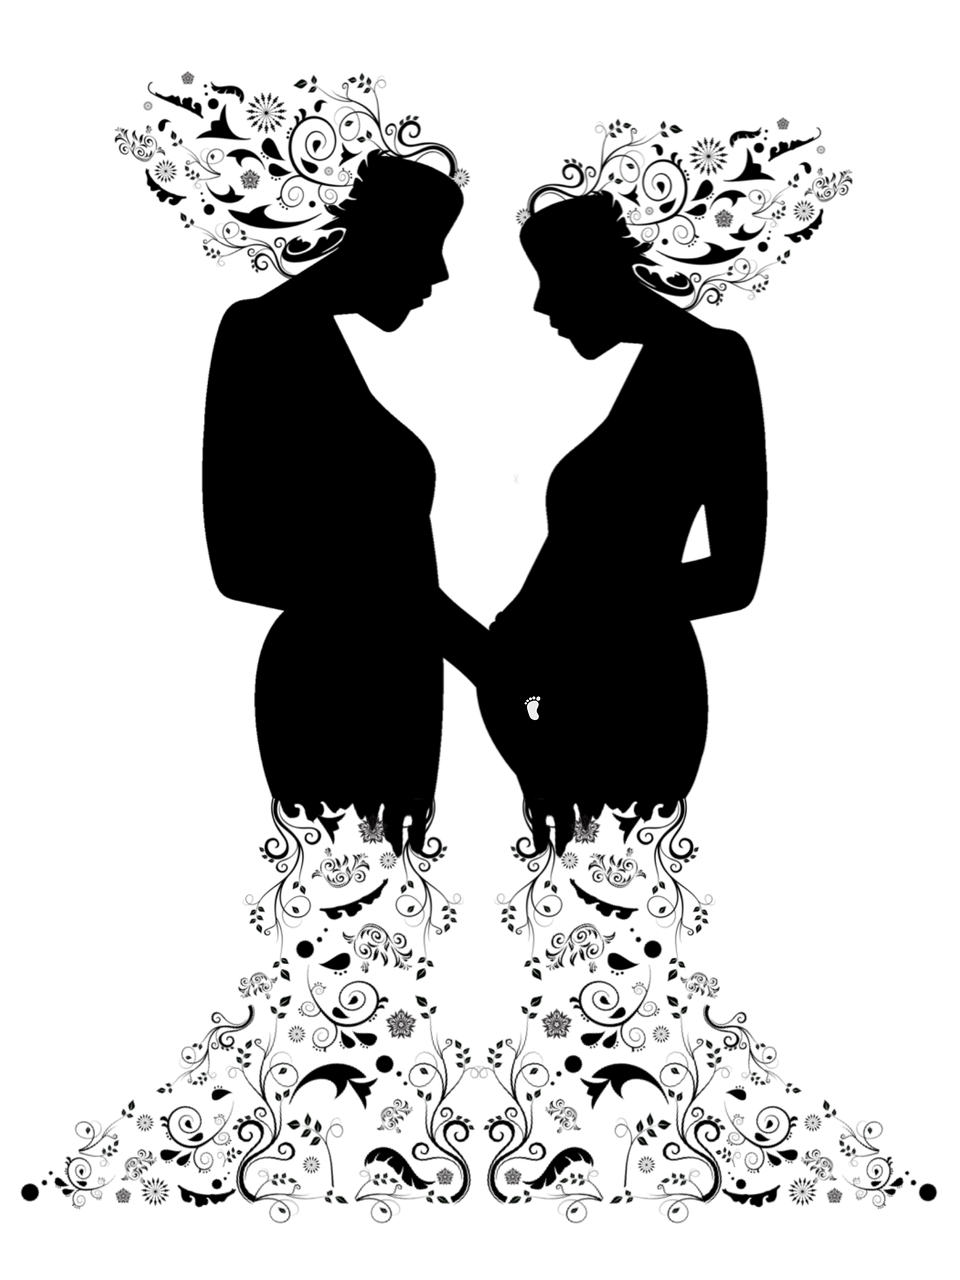 a person on a snowboard in the dark, a screenshot, by Daren Bader, reddit, generative art, black dots, arcade, small bees following the leader, iphone picture